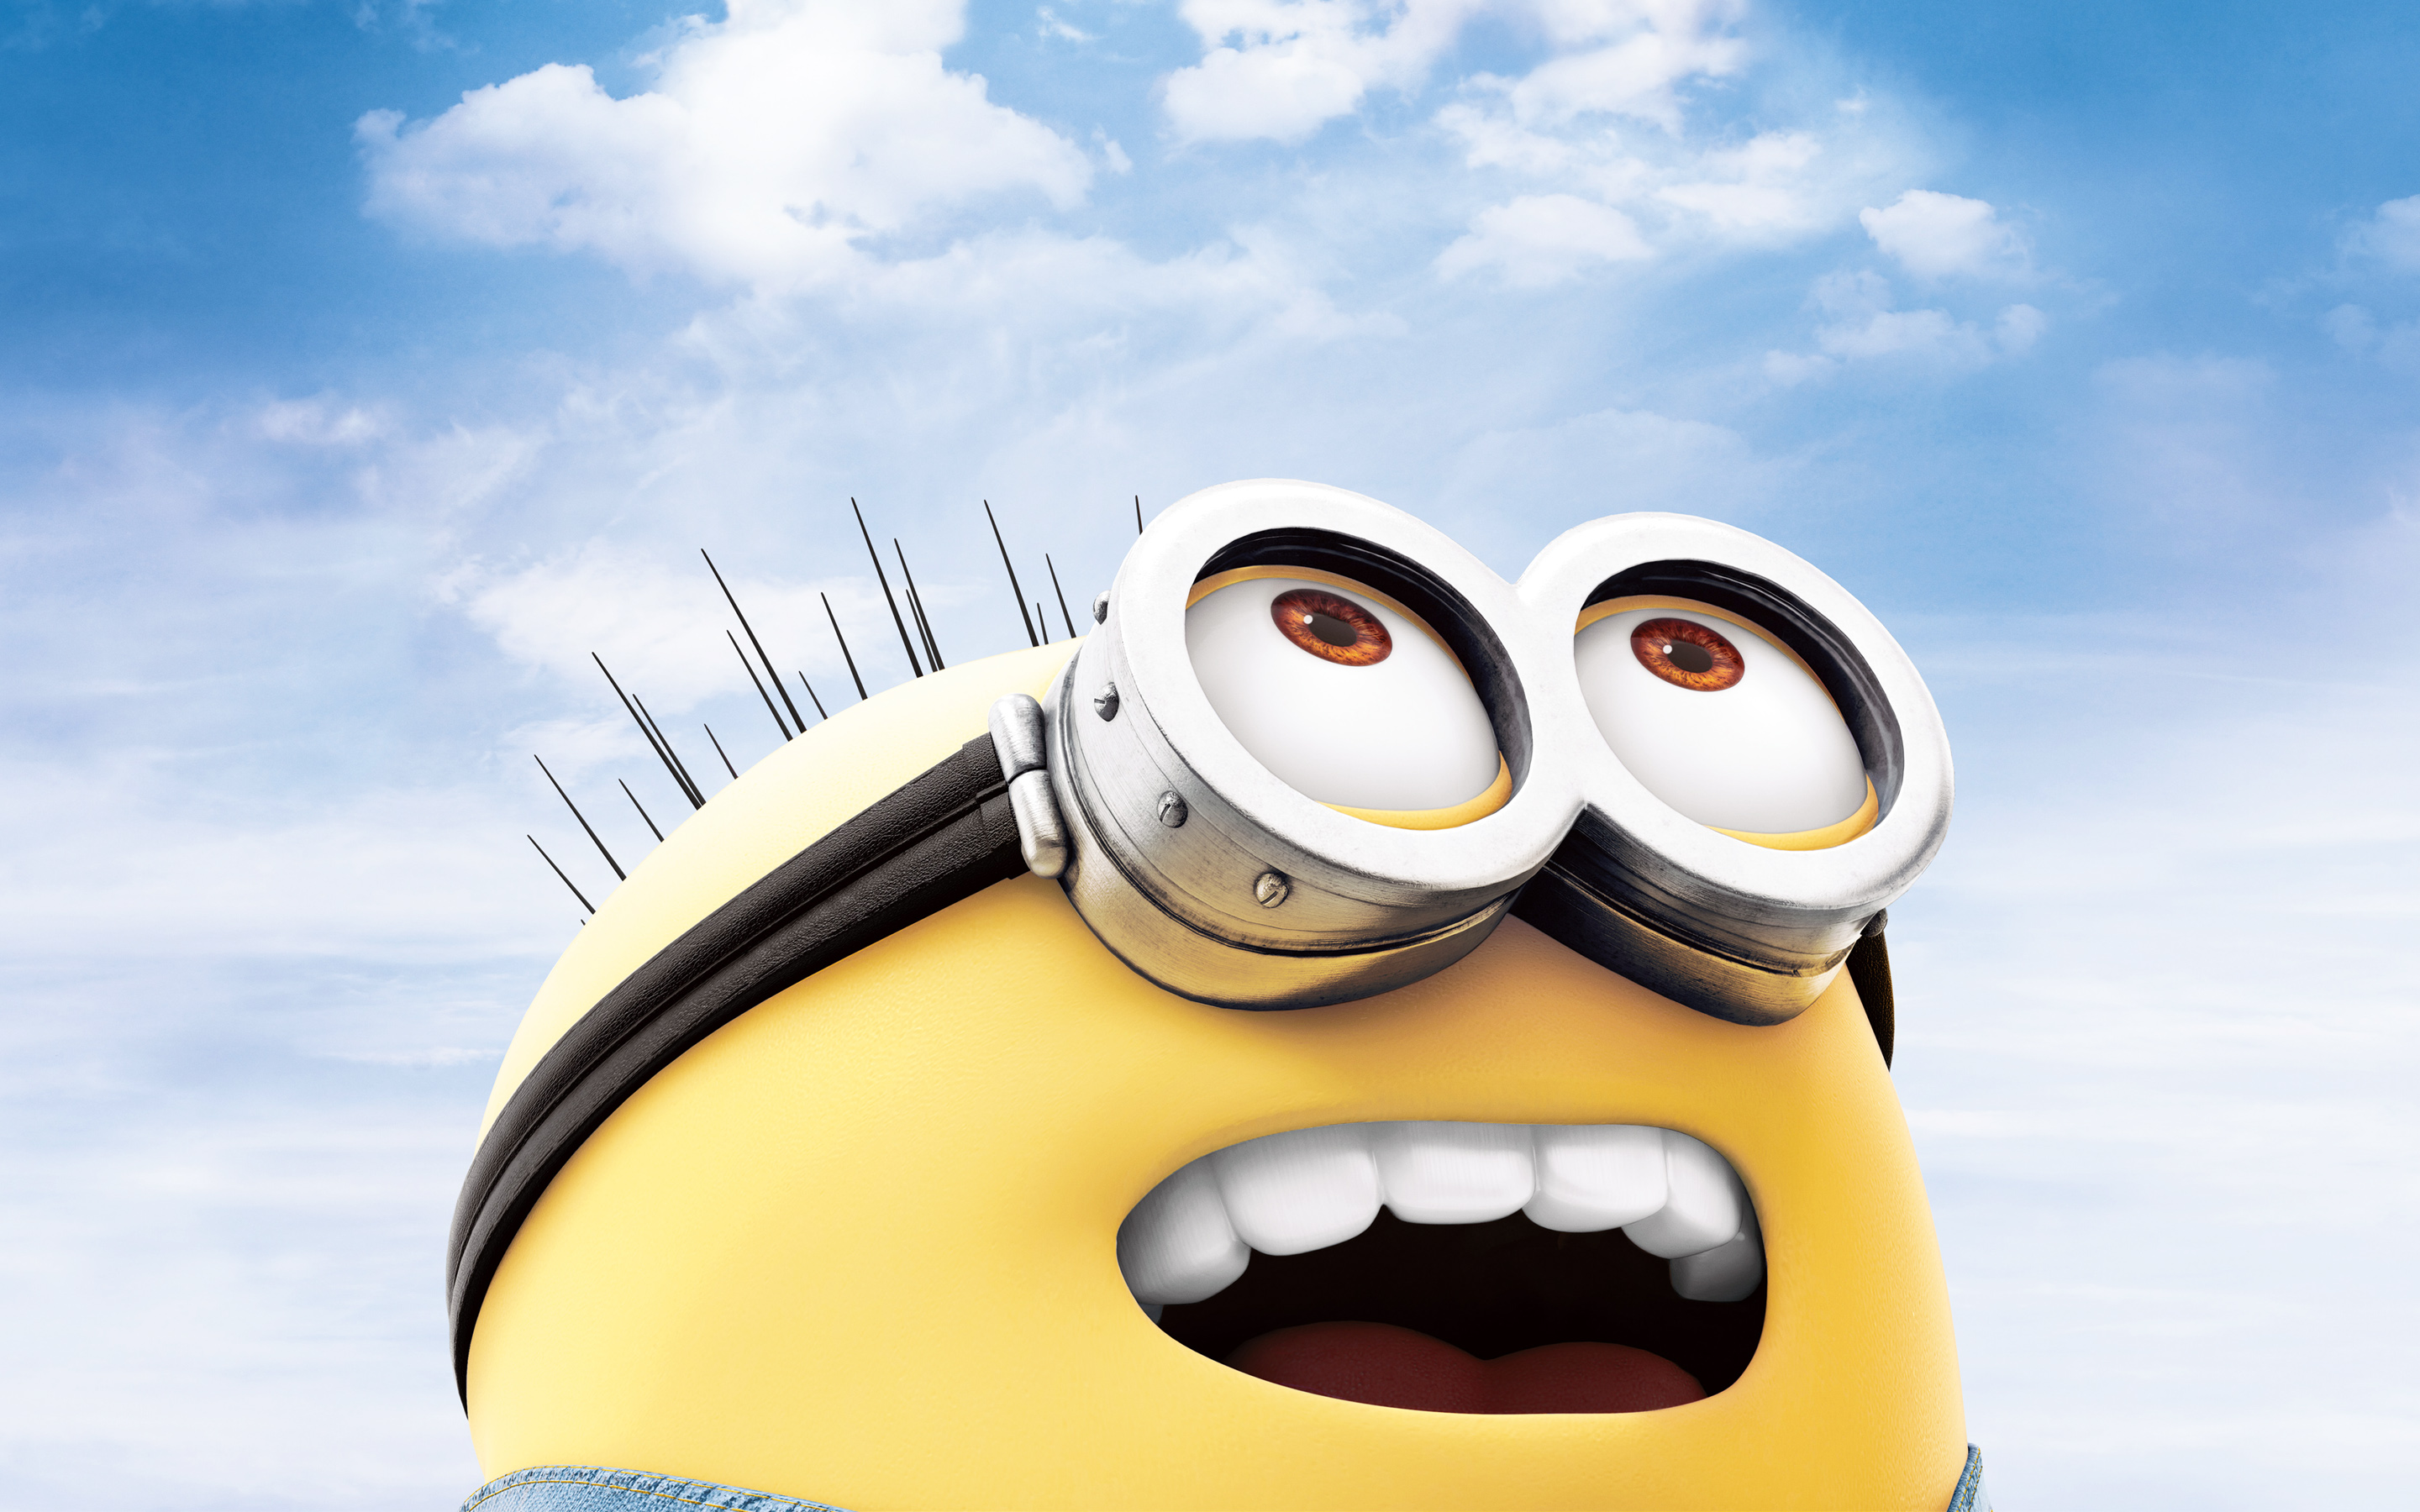 minion in despicable me 2 the mic wallpaper pictures hd wallpapers